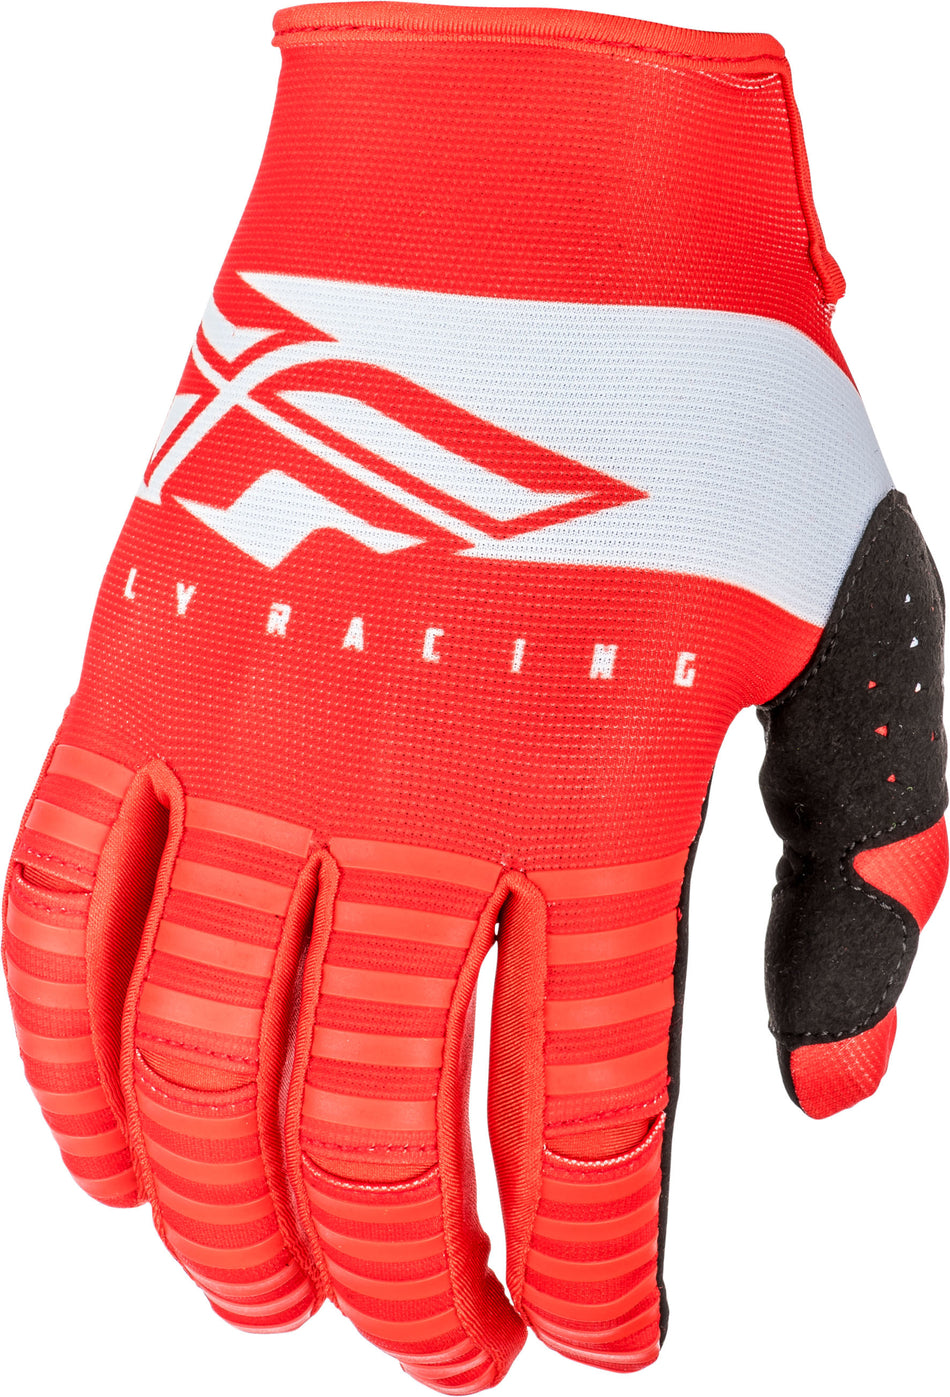 FLY RACING Kinetic Shield Gloves Red/White Sz 13 372-41213